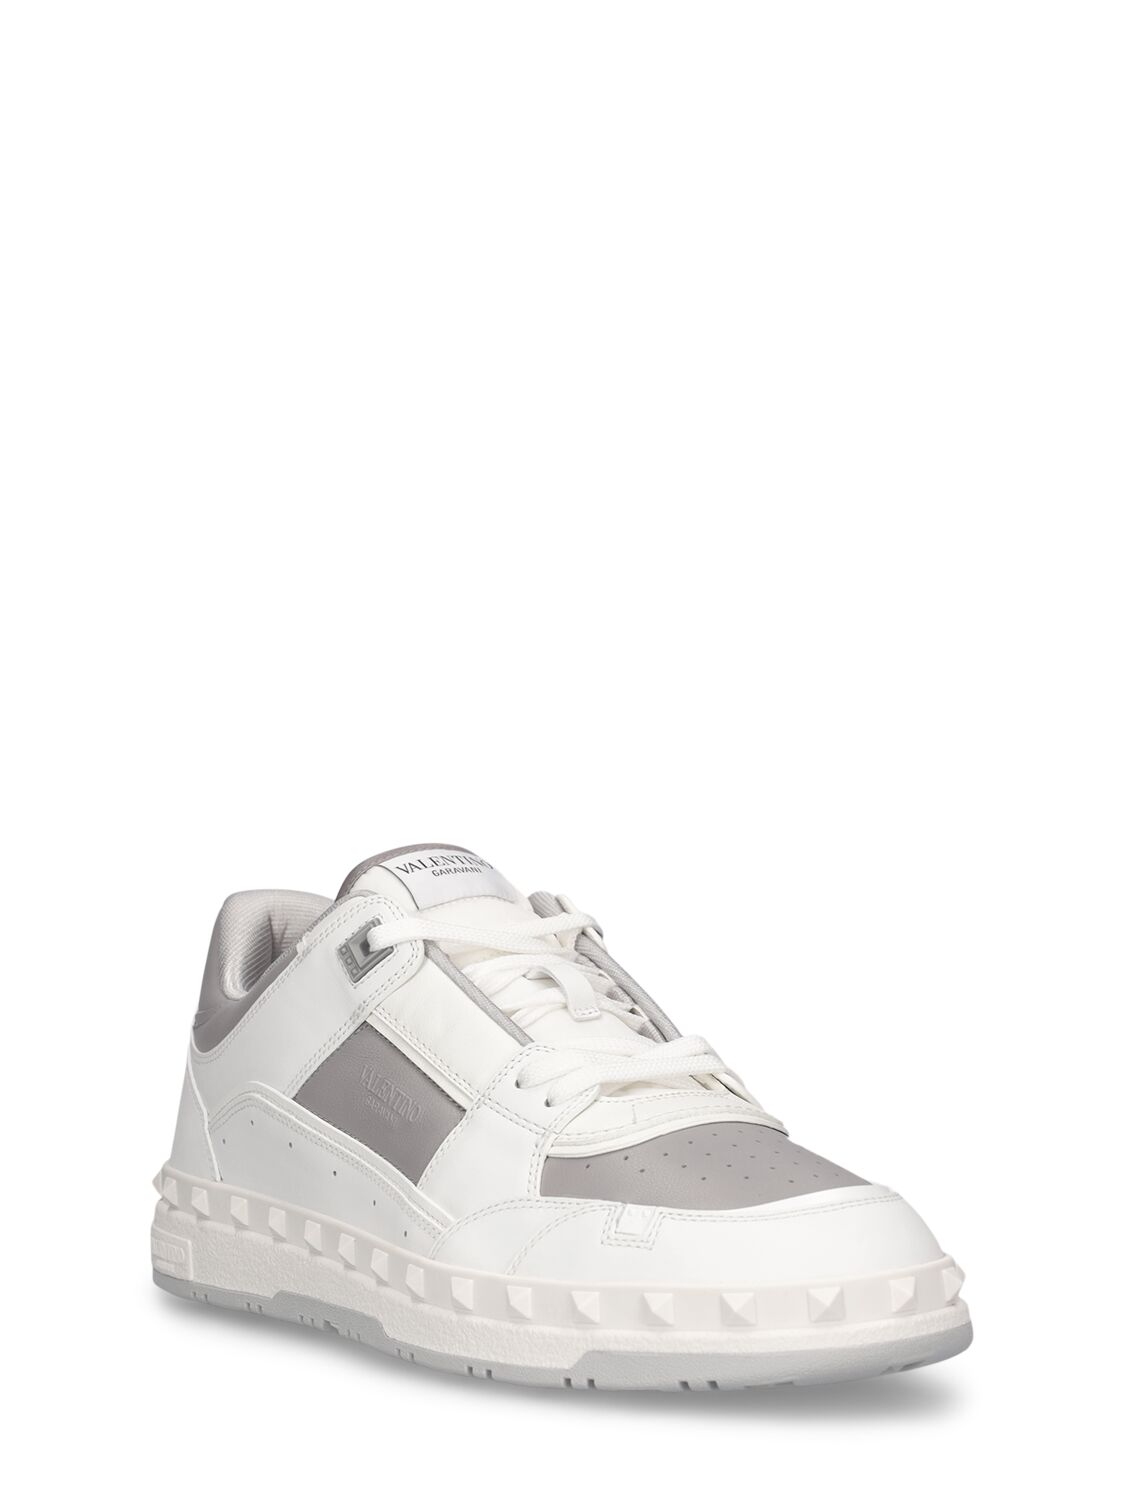 Shop Valentino Freedots Leather Low Top Sneakers In White,grey